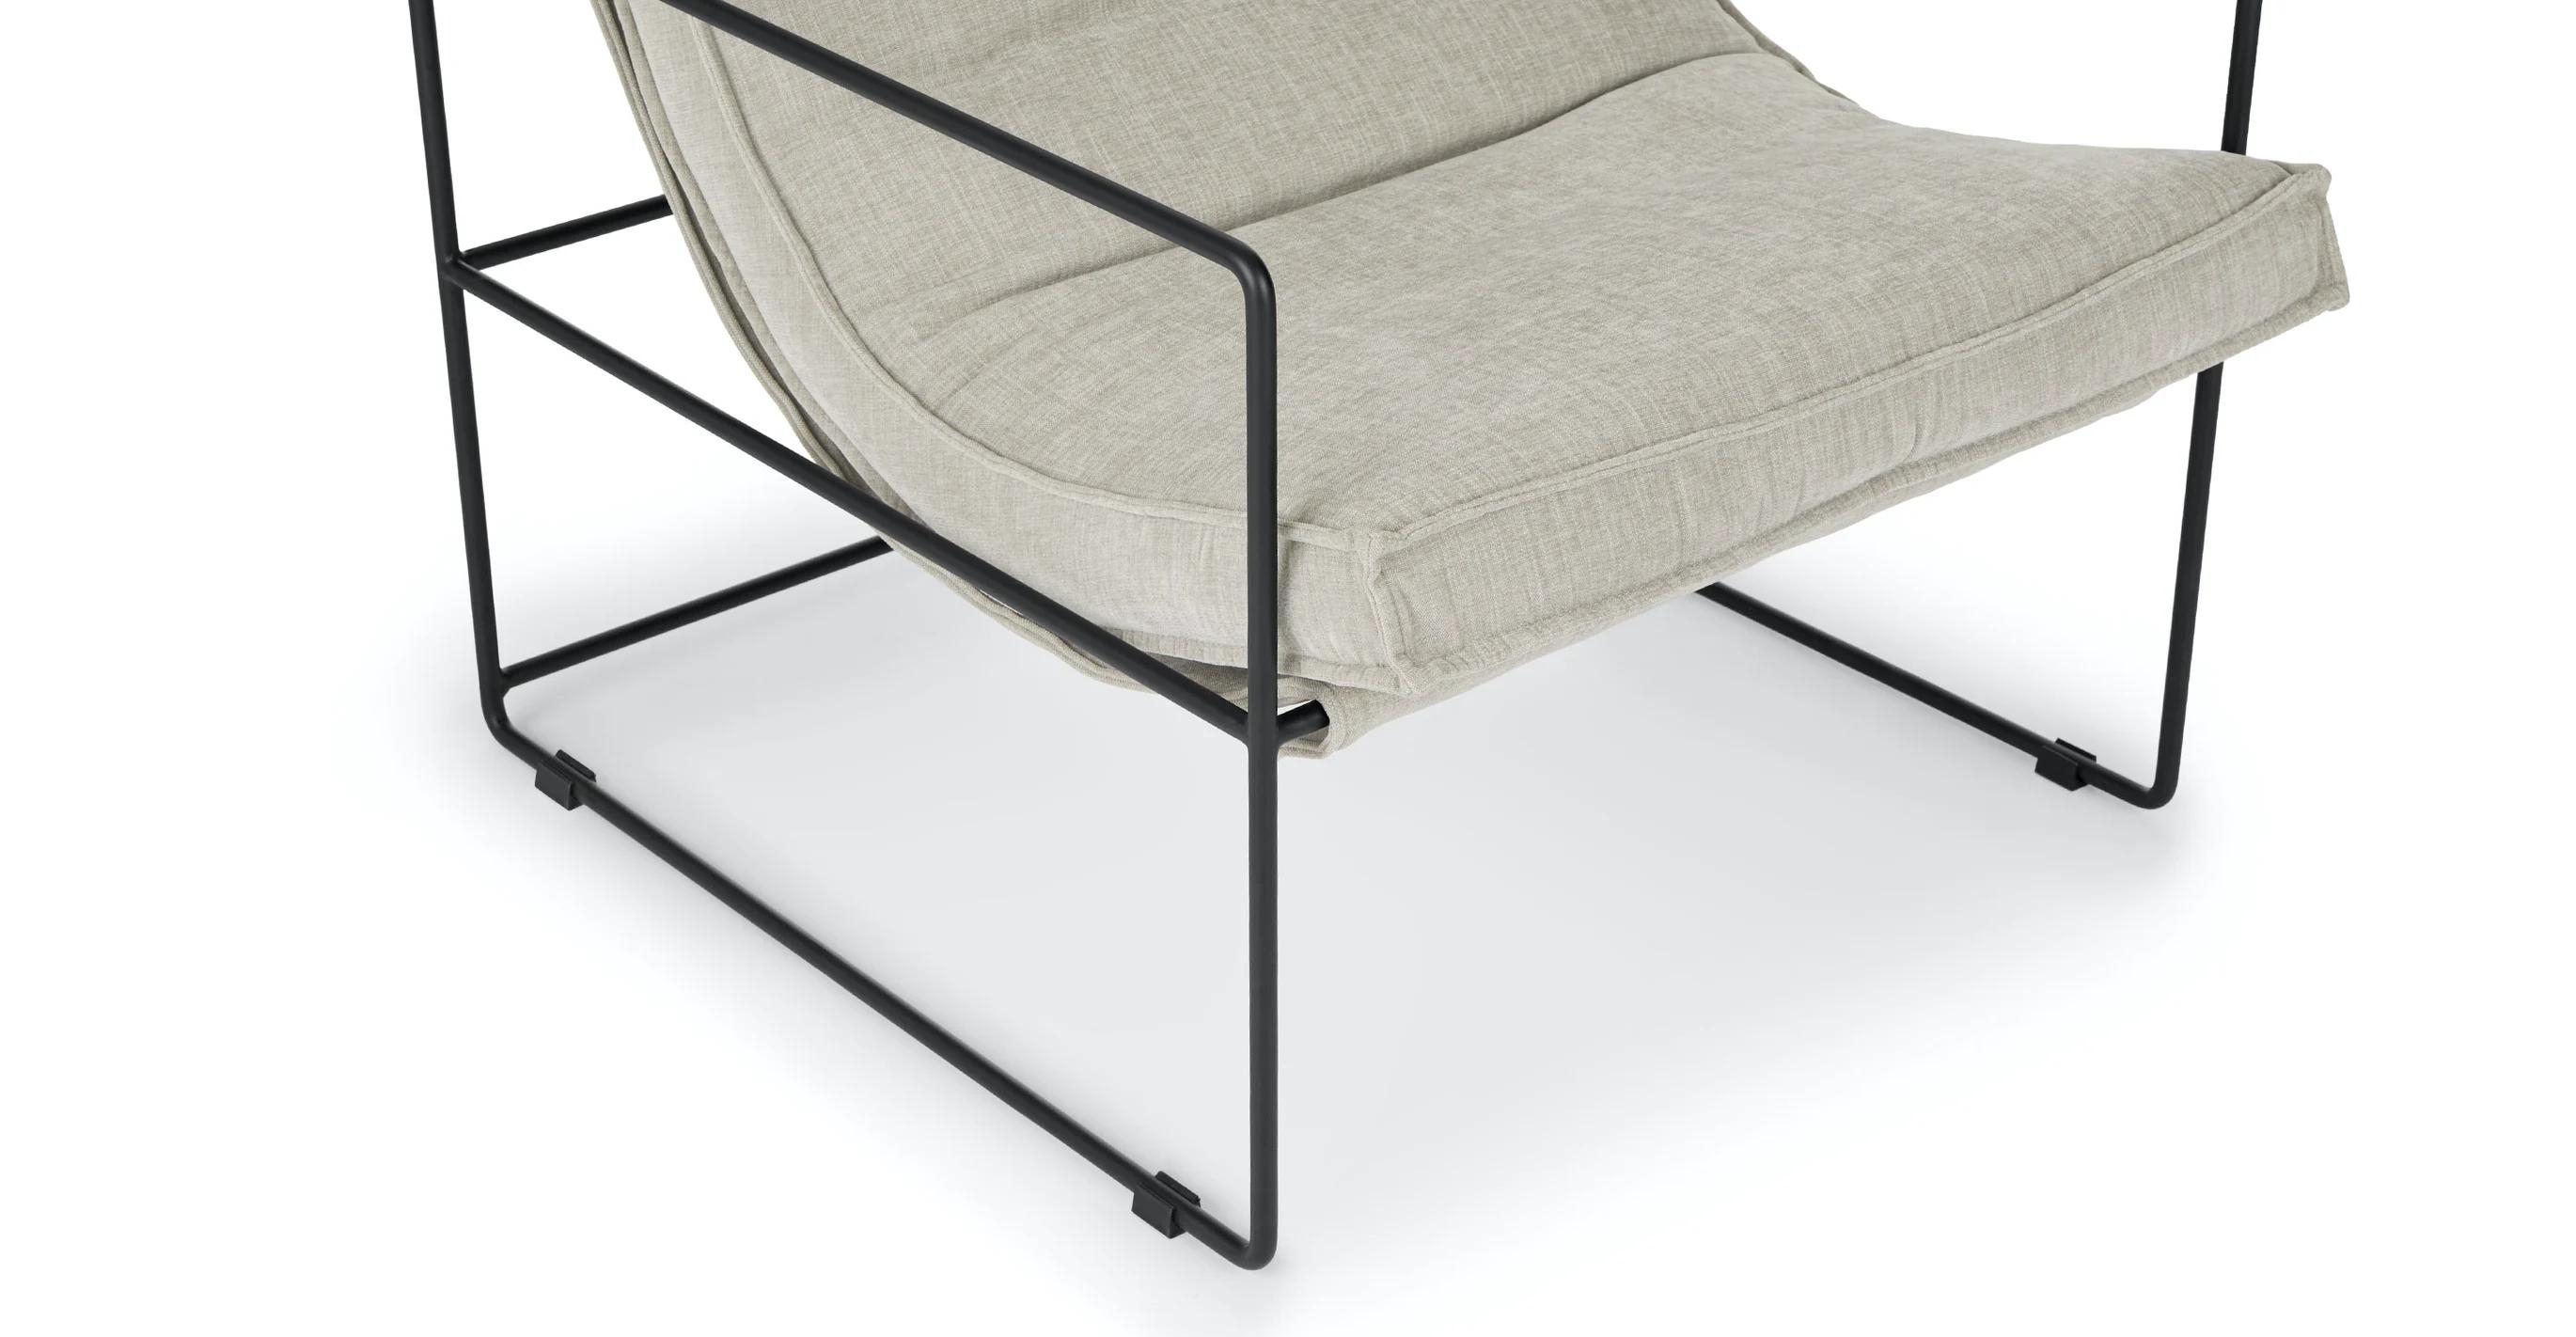 Entin Whistle Gray Lounge Chair - Image 5